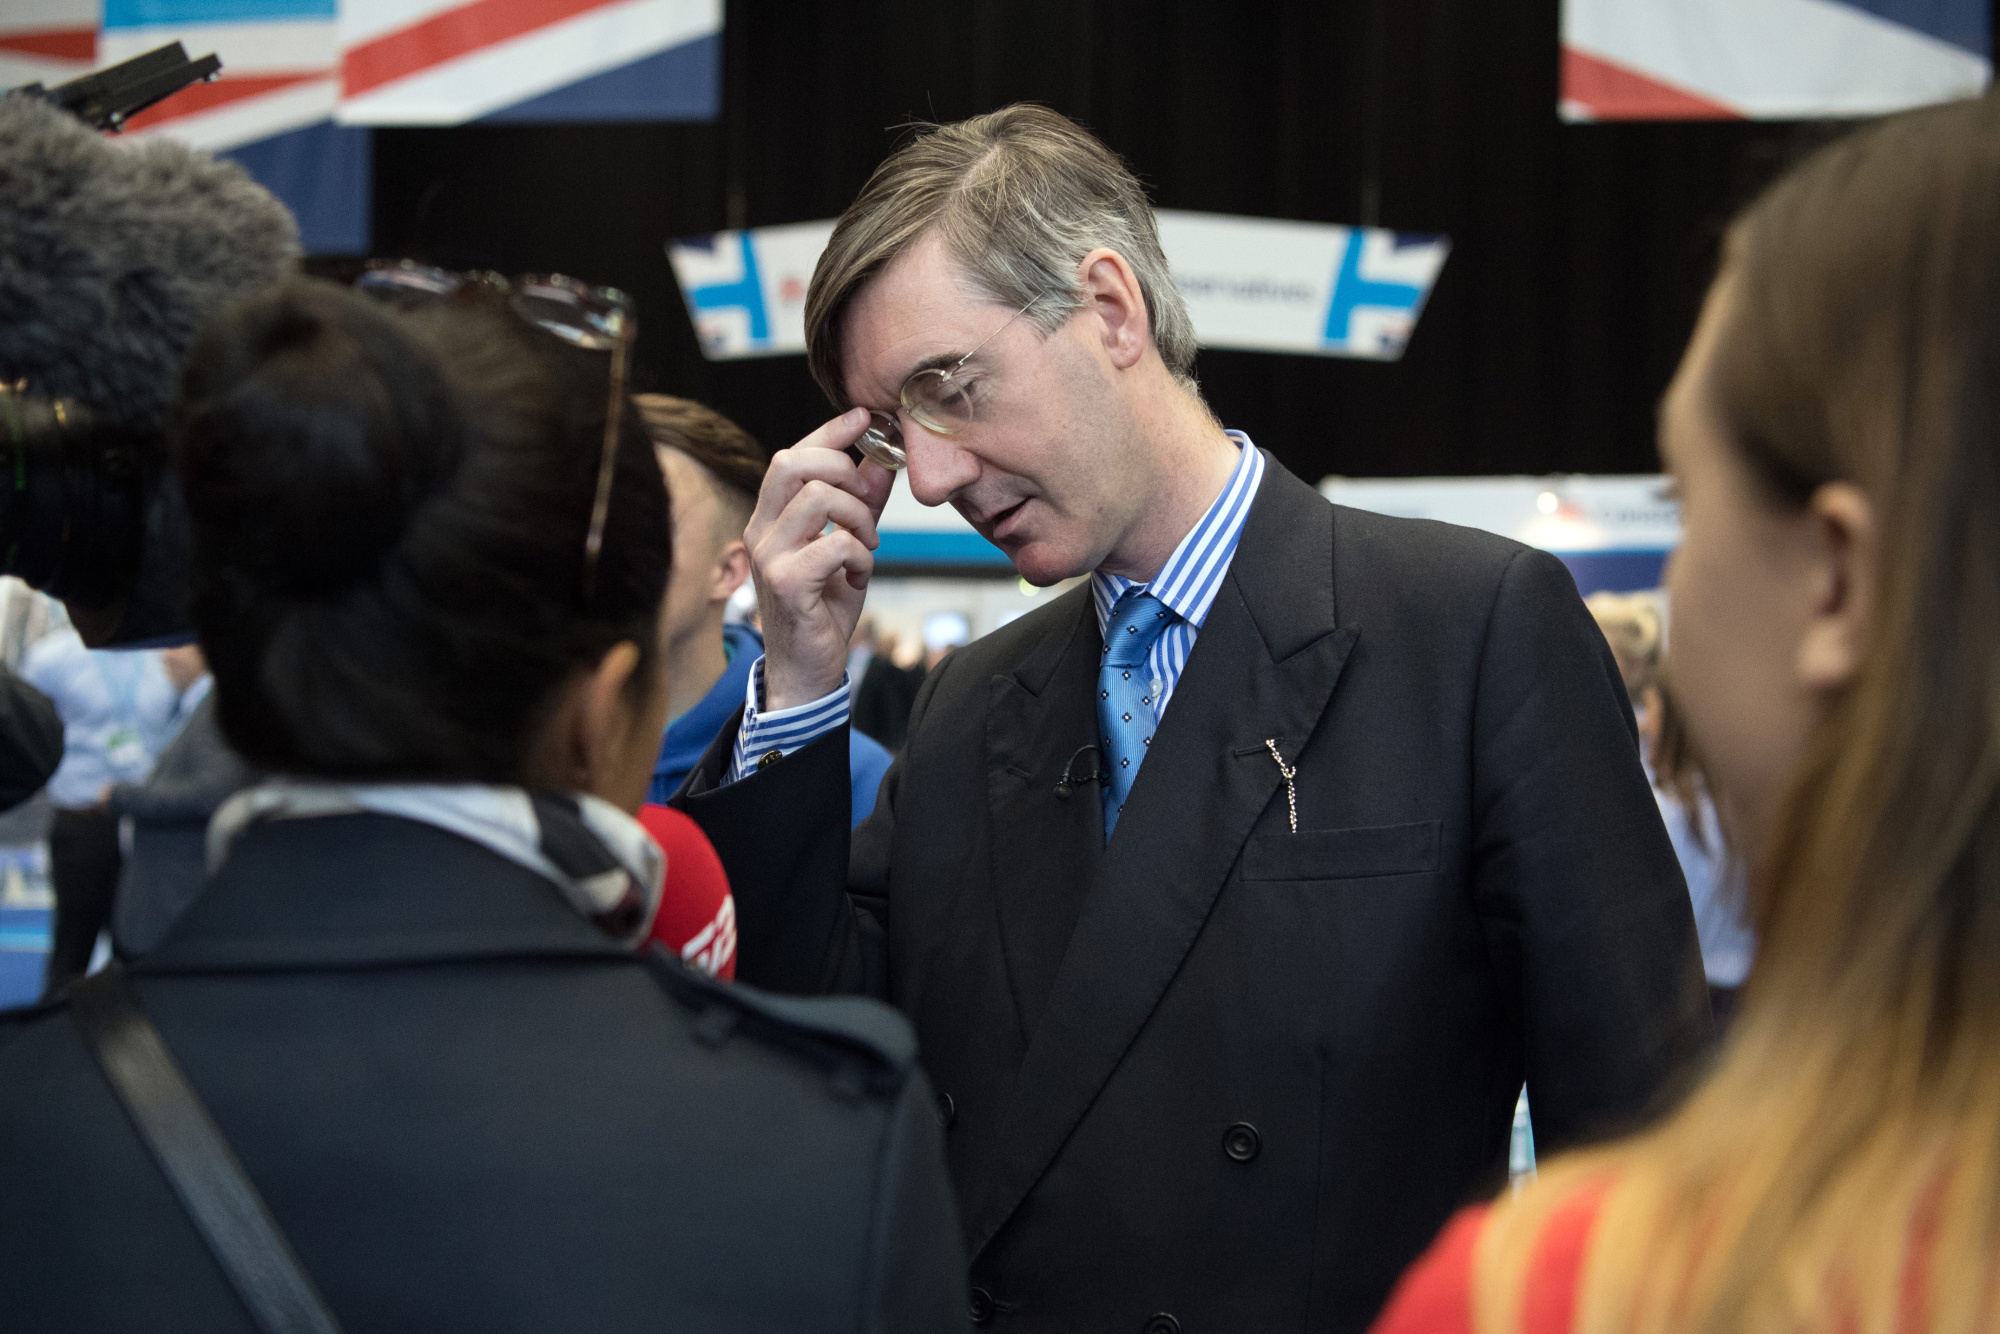 Jacob Rees-Mogg speaks to attendees and delegates on day two of the Conservative Party Conference at Manchester Central on October 2, 2017.
